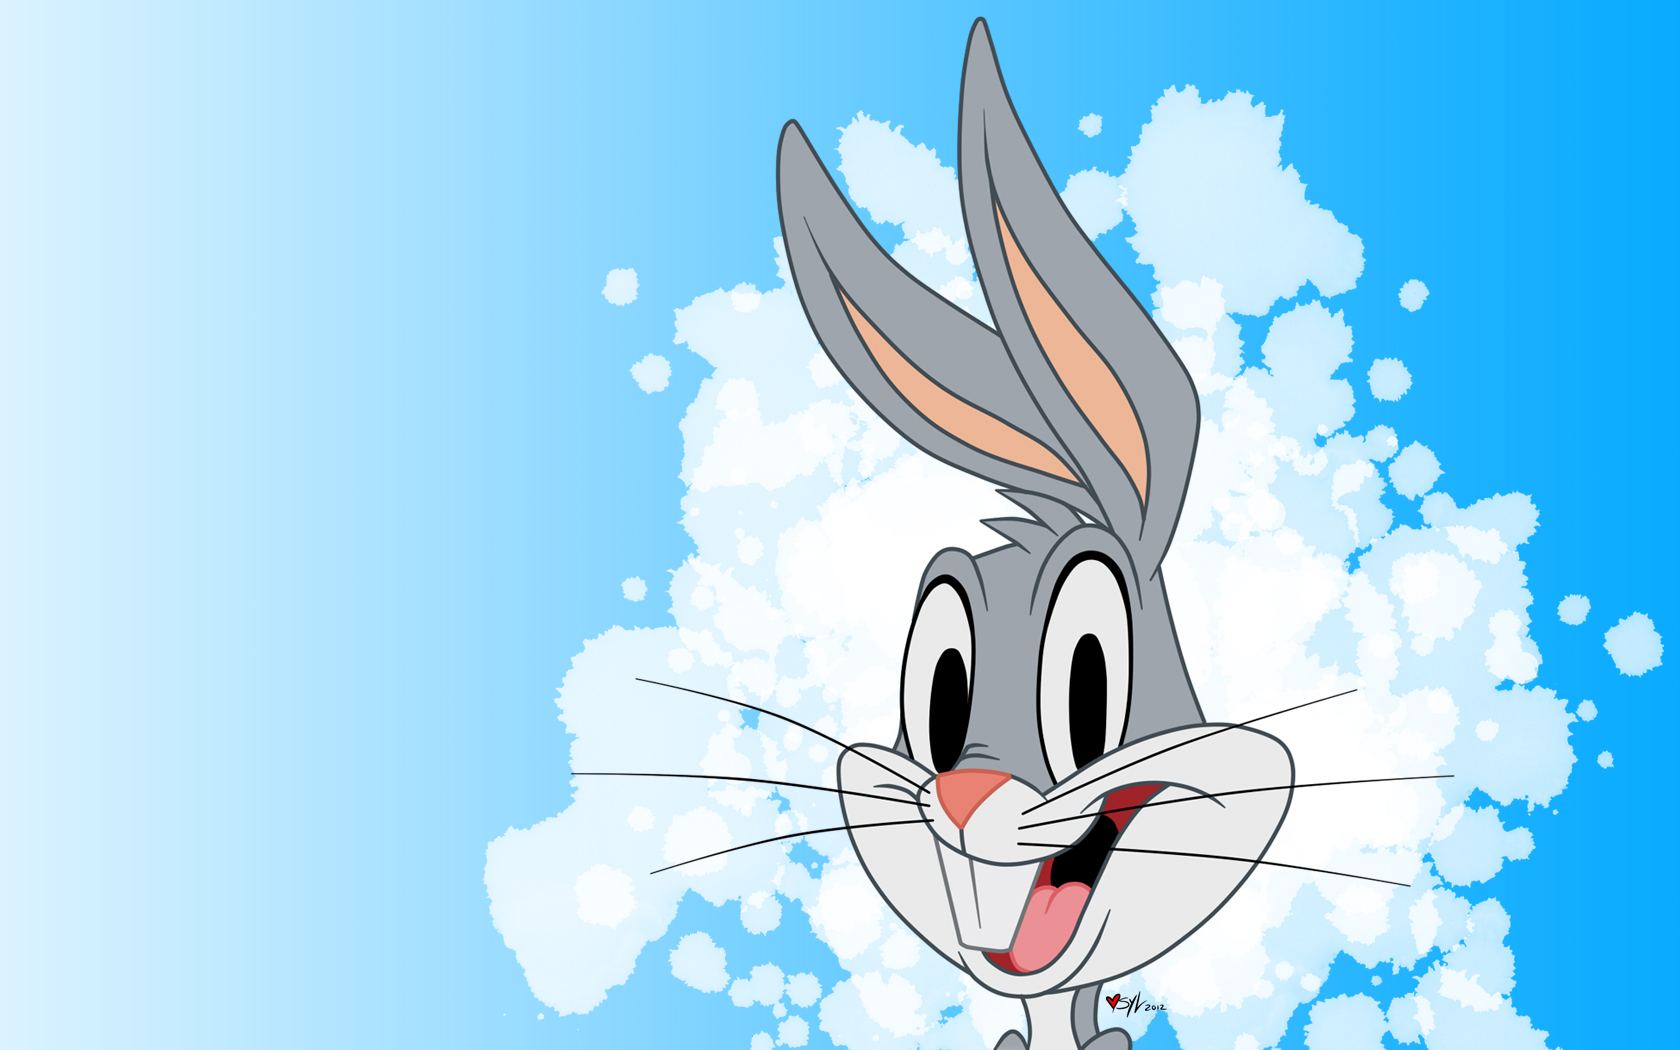 Bugs Bunny Wallpaper by SylvieNe on